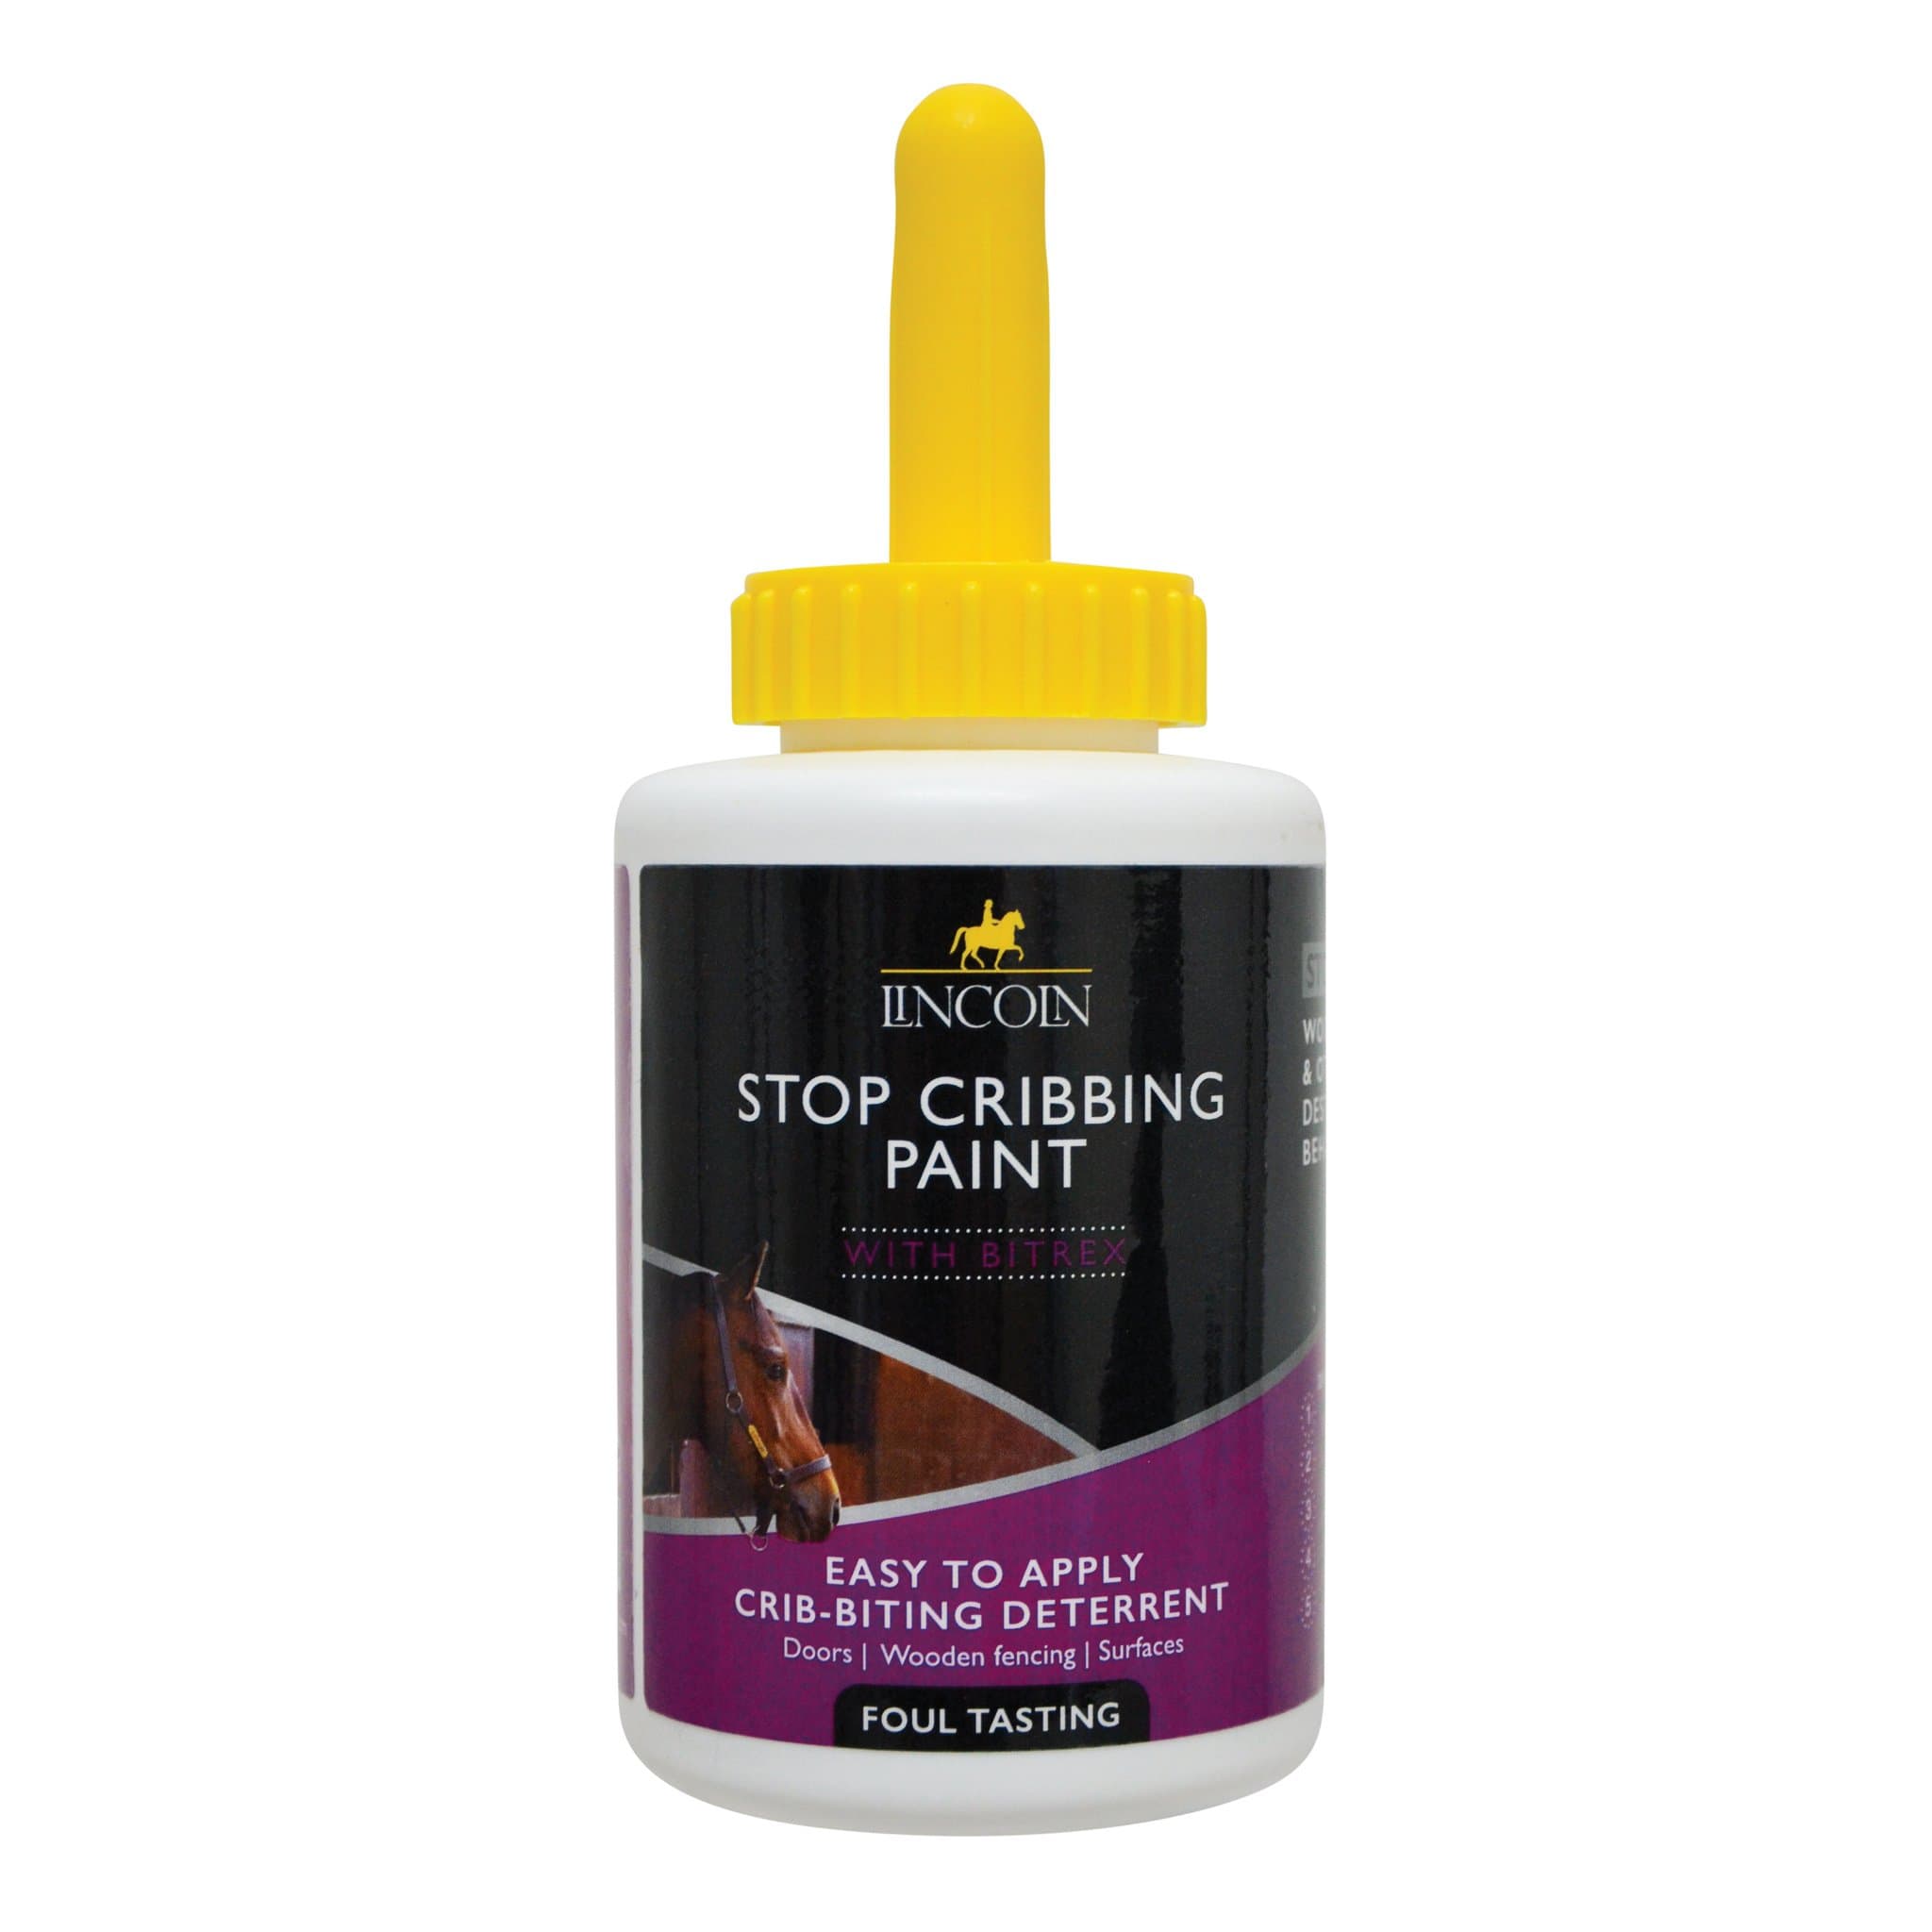 Lincoln Stop Cribbing Paint 13663 200ml